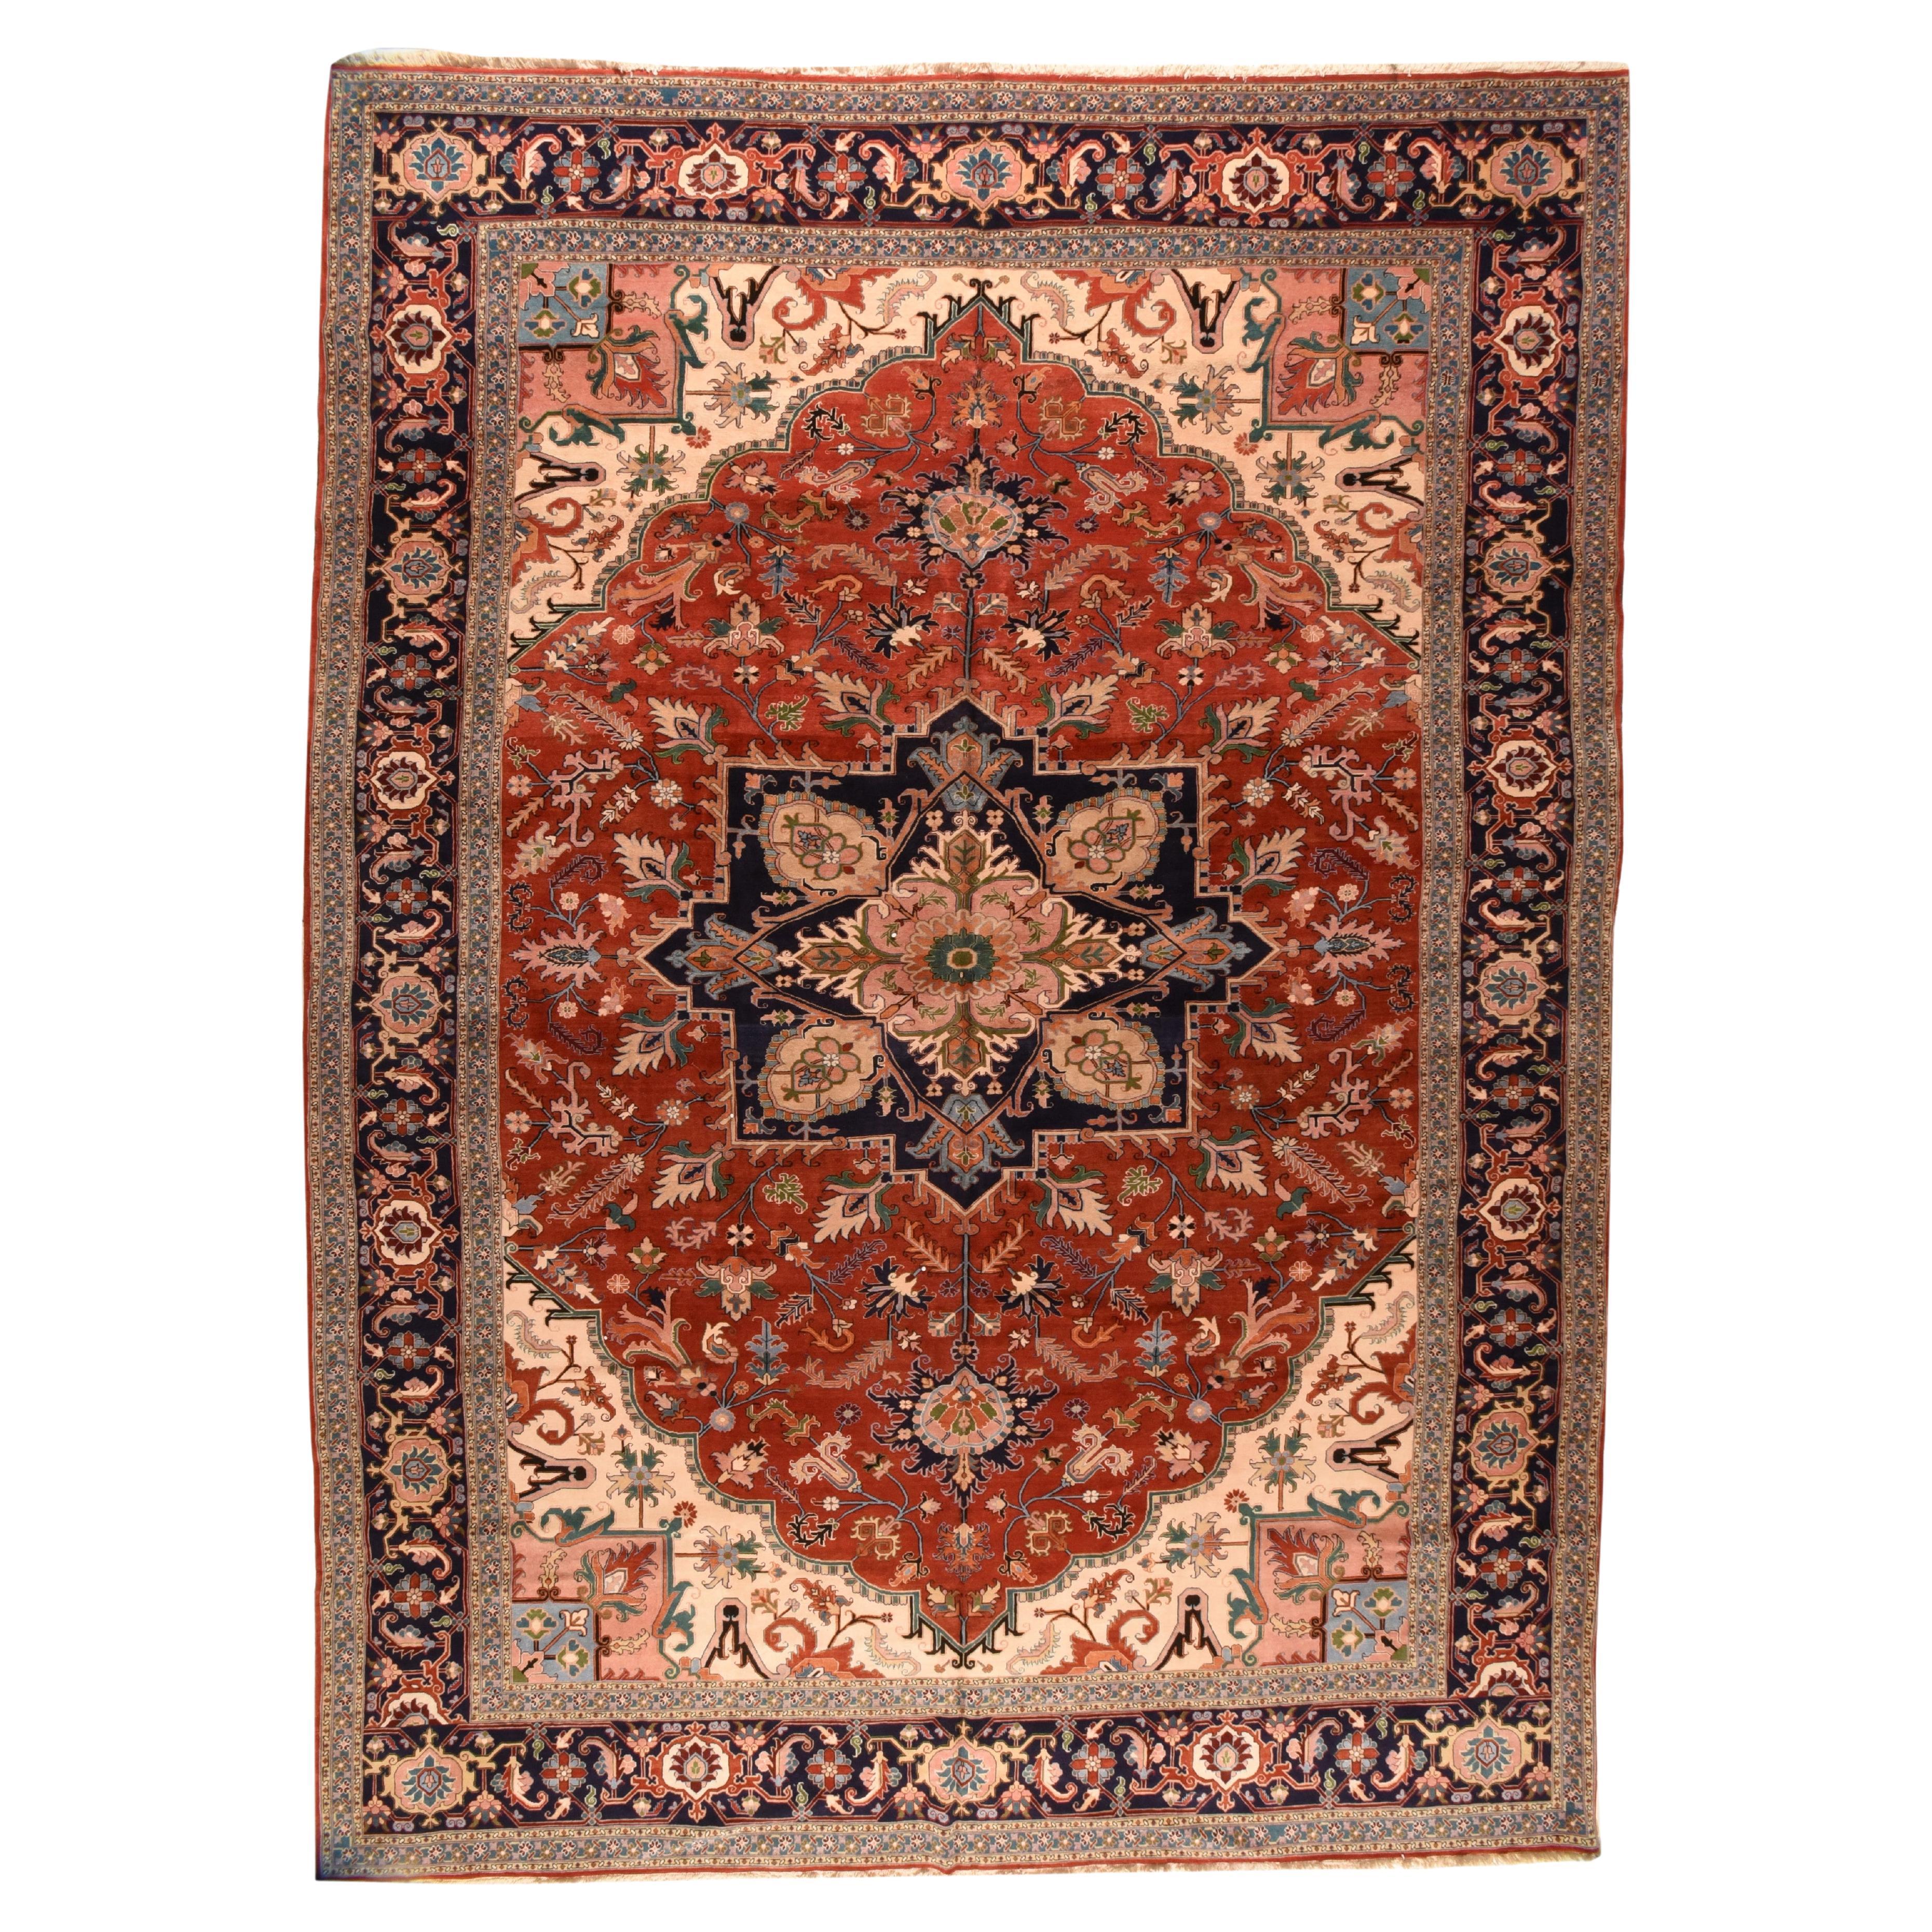 This rather well-drawn rustic carpet shows a scalloped red field centred by a four palmettes, octogramme navy medallion with ragged palmette pendants. Ivory conjoint corner pieces. Spiky leaves and flowers. Navy-black strip-style border with